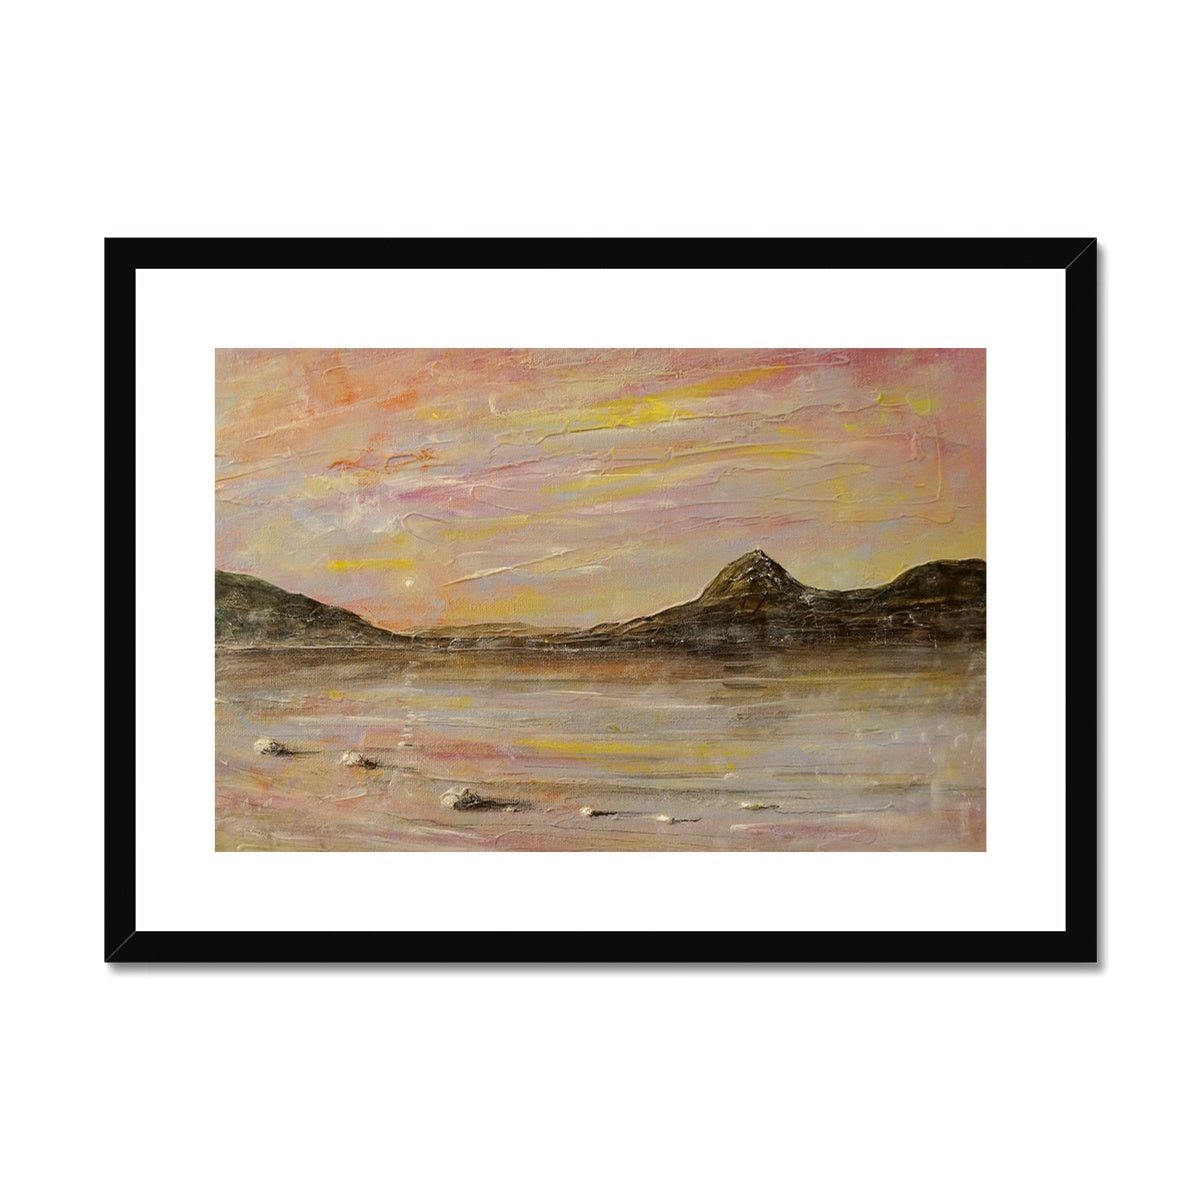 Loch Rannoch Dawn Painting | Framed & Mounted Prints From Scotland-Framed & Mounted Prints-Scottish Lochs & Mountains Art Gallery-A2 Landscape-Black Frame-Paintings, Prints, Homeware, Art Gifts From Scotland By Scottish Artist Kevin Hunter